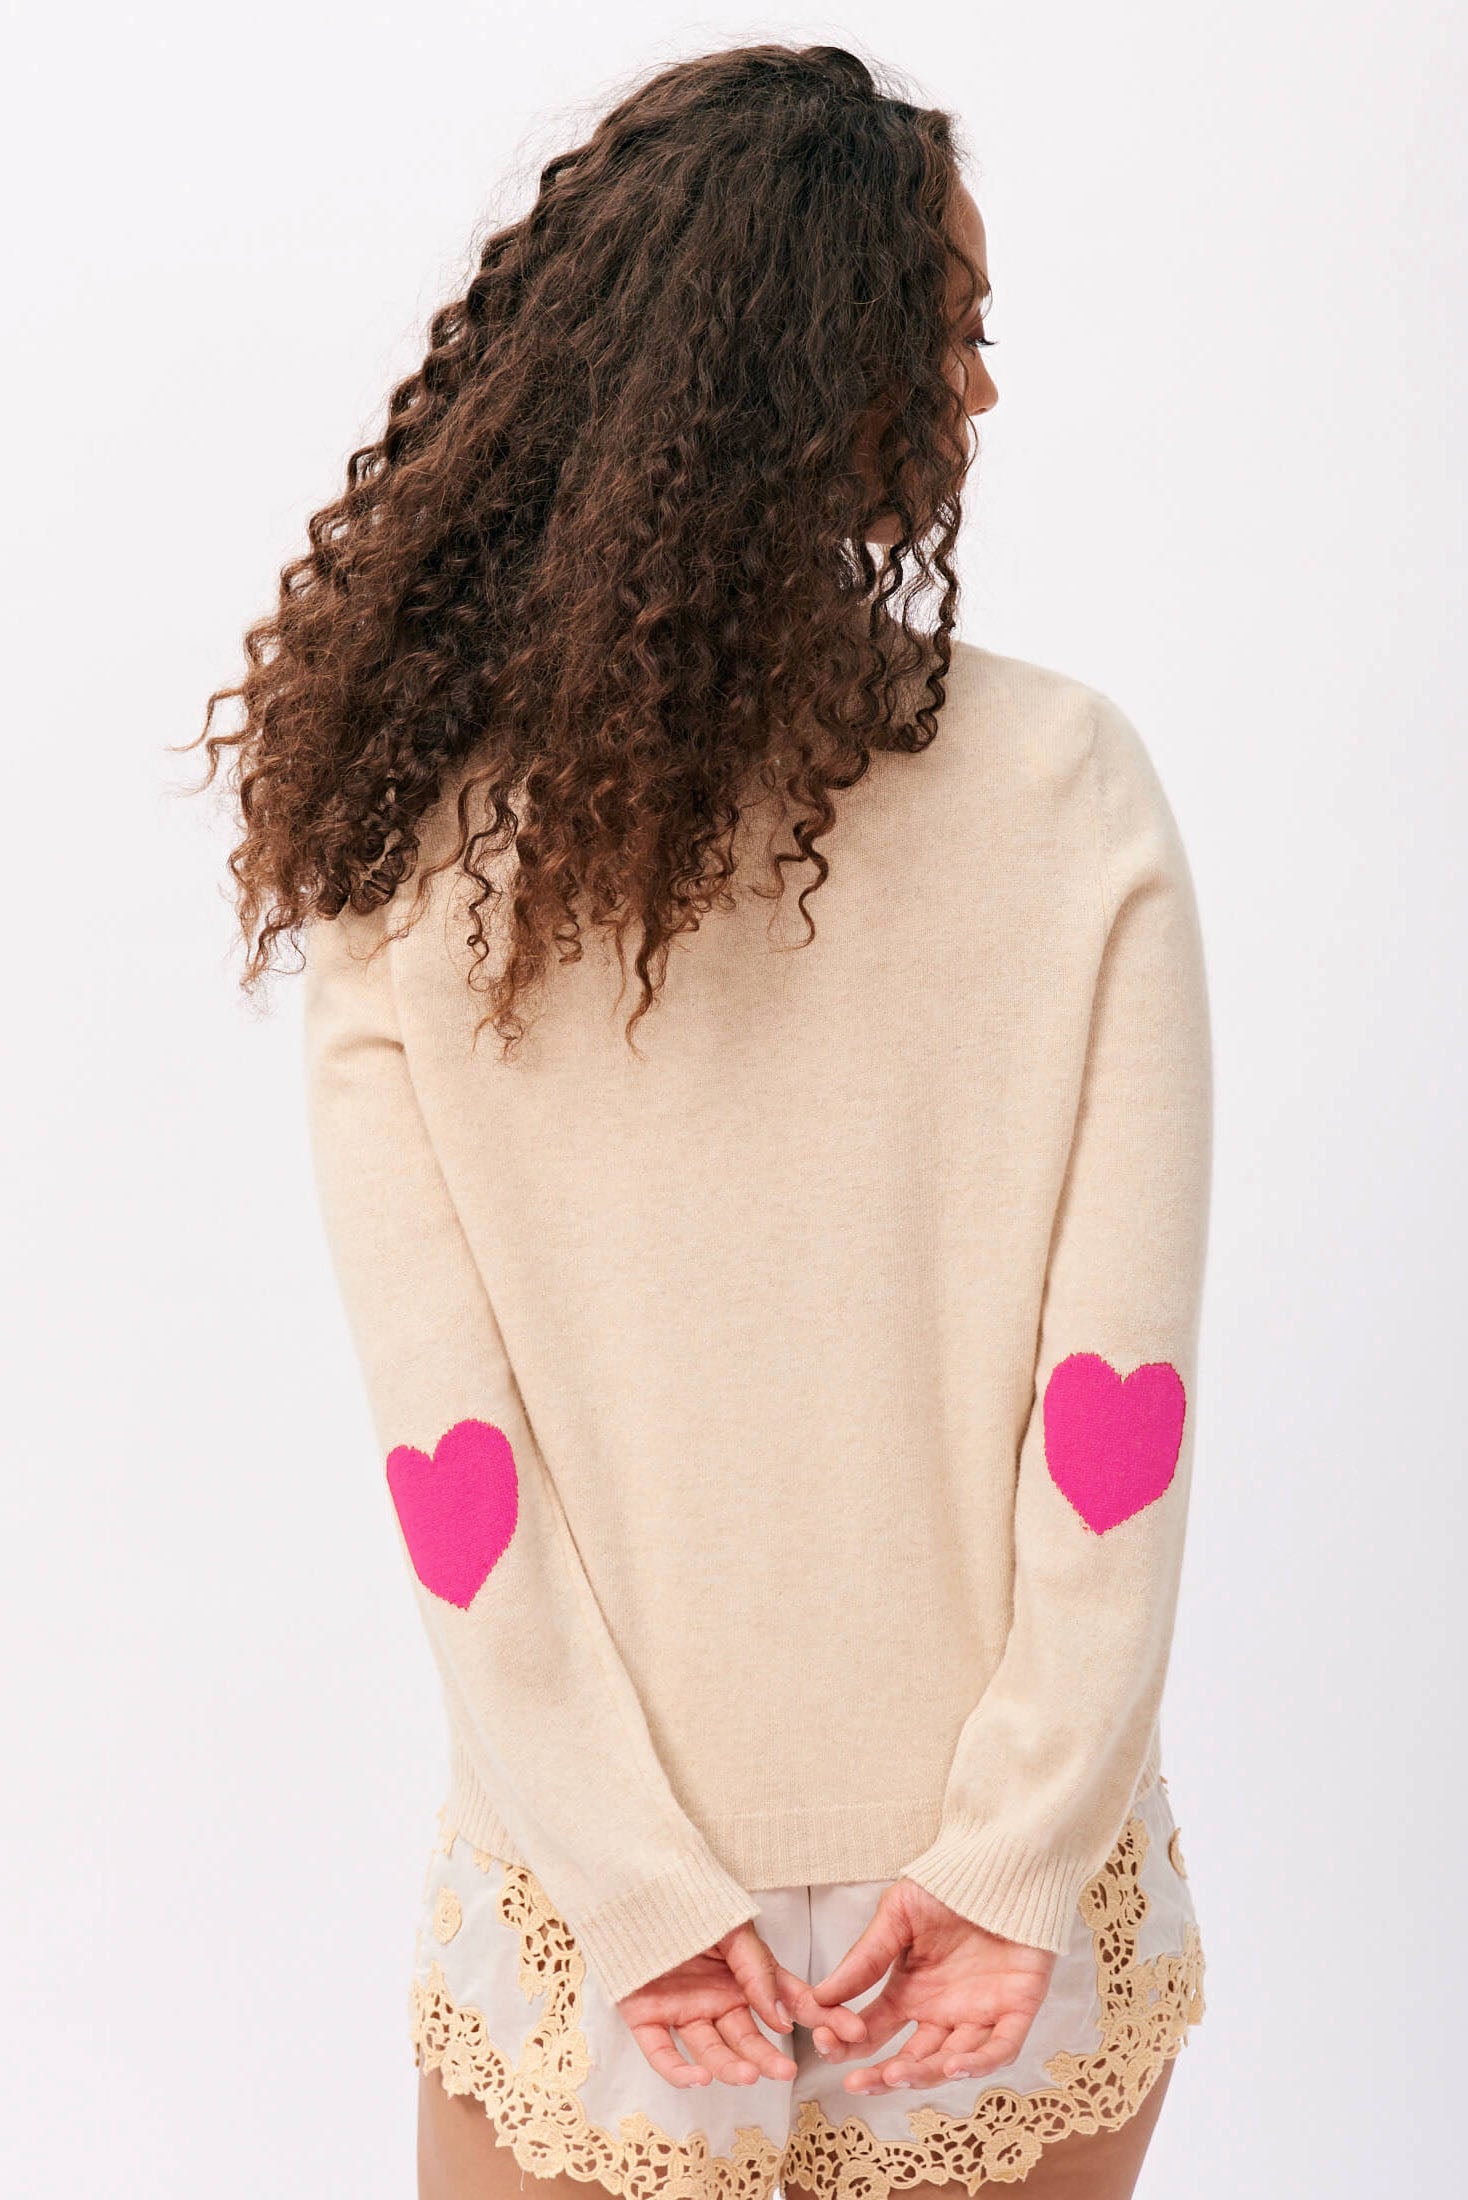 Brown haired female model wearing Jumper 1234 cashmere heart patch cardigan in oatmeal with hot pink heart elbow patches facing away from the camera